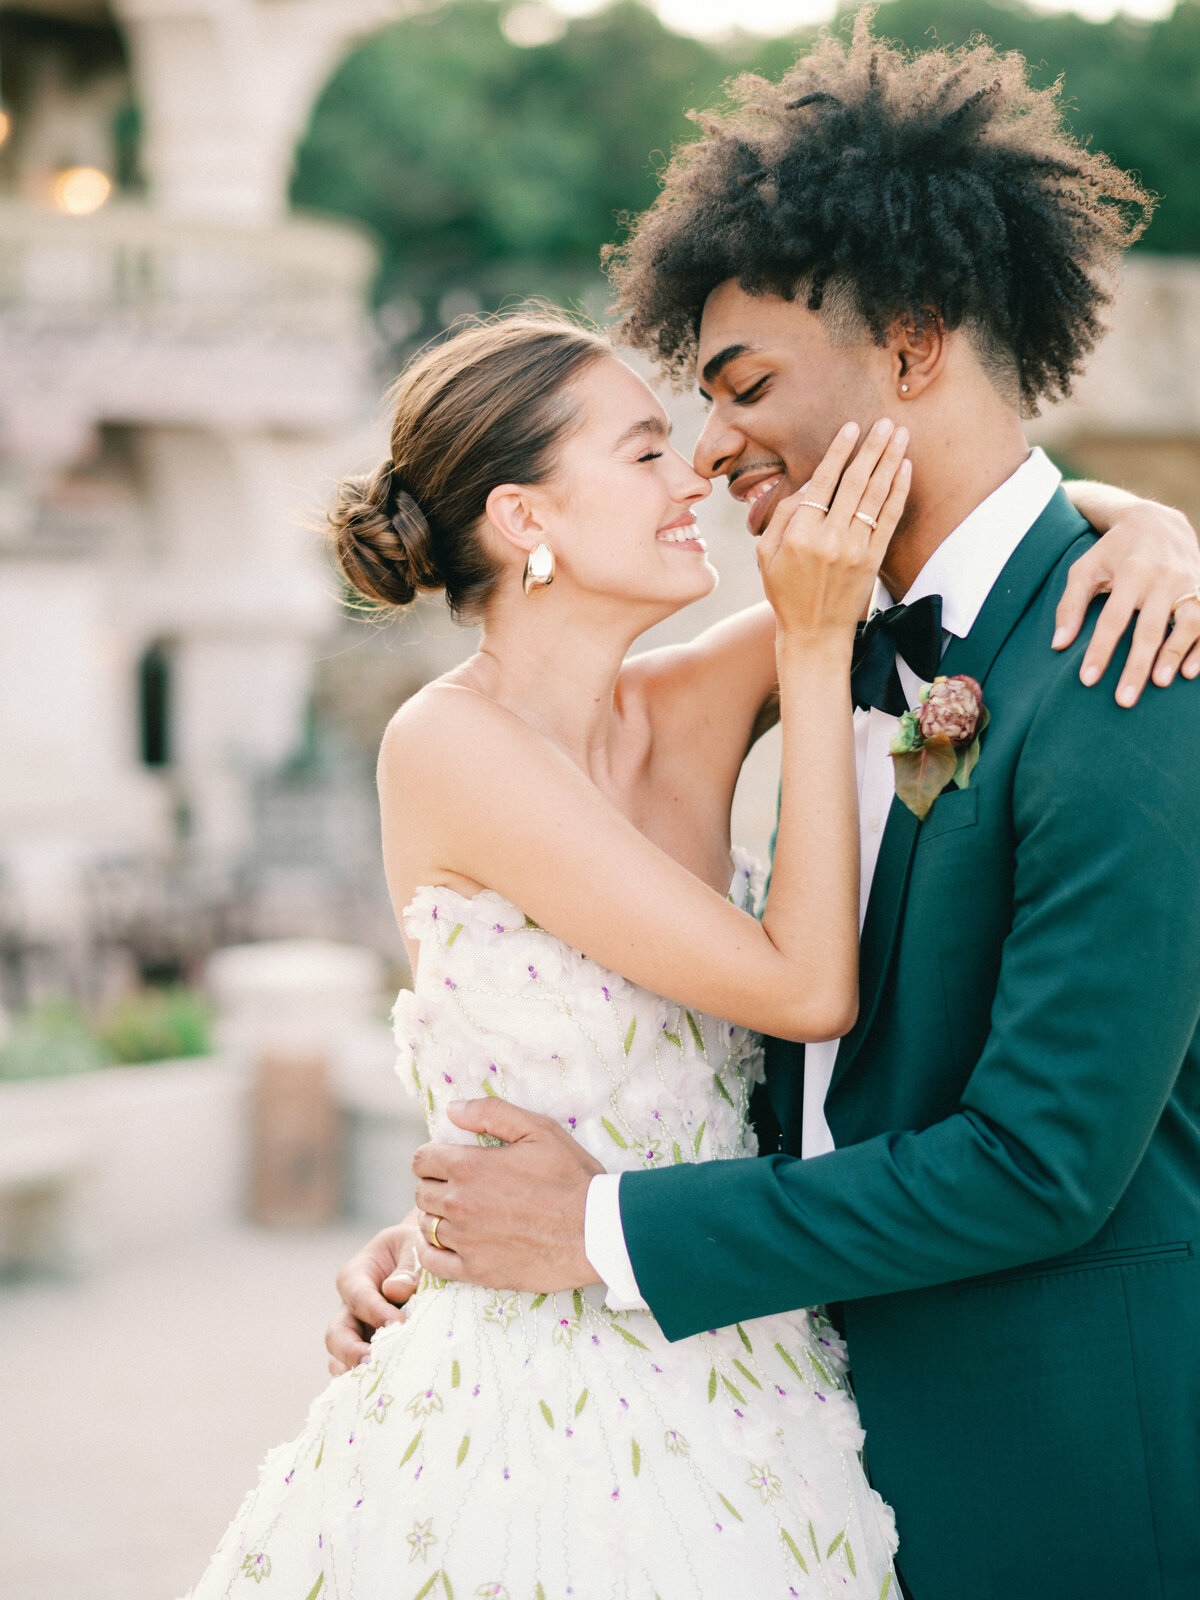 editorial wedding couple candid kissing in love laughing